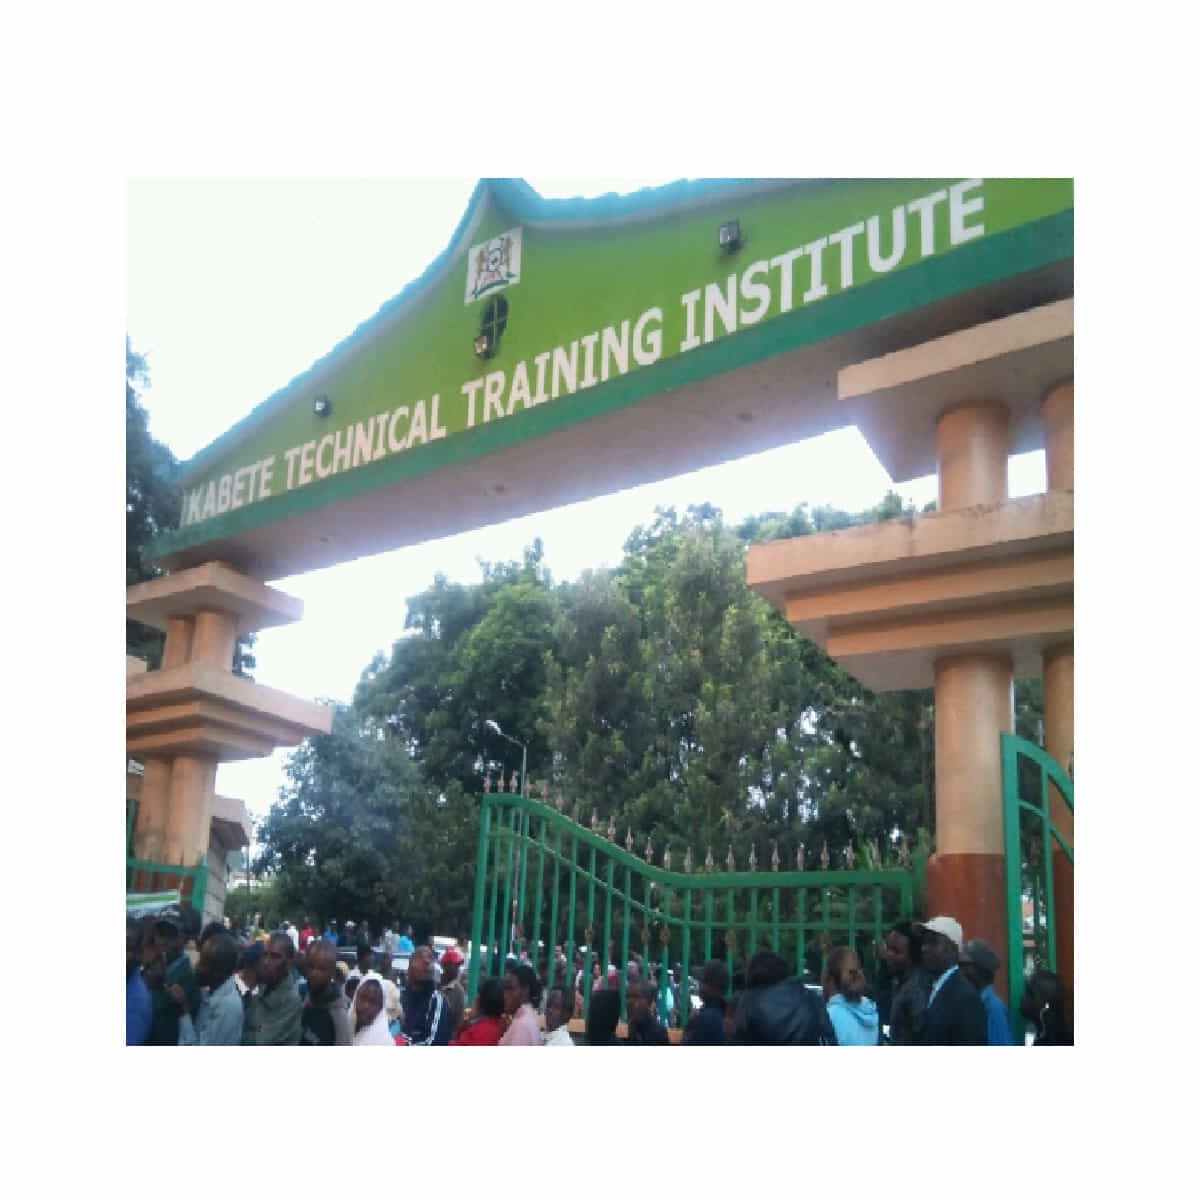 Kabete technical training institute courses offered